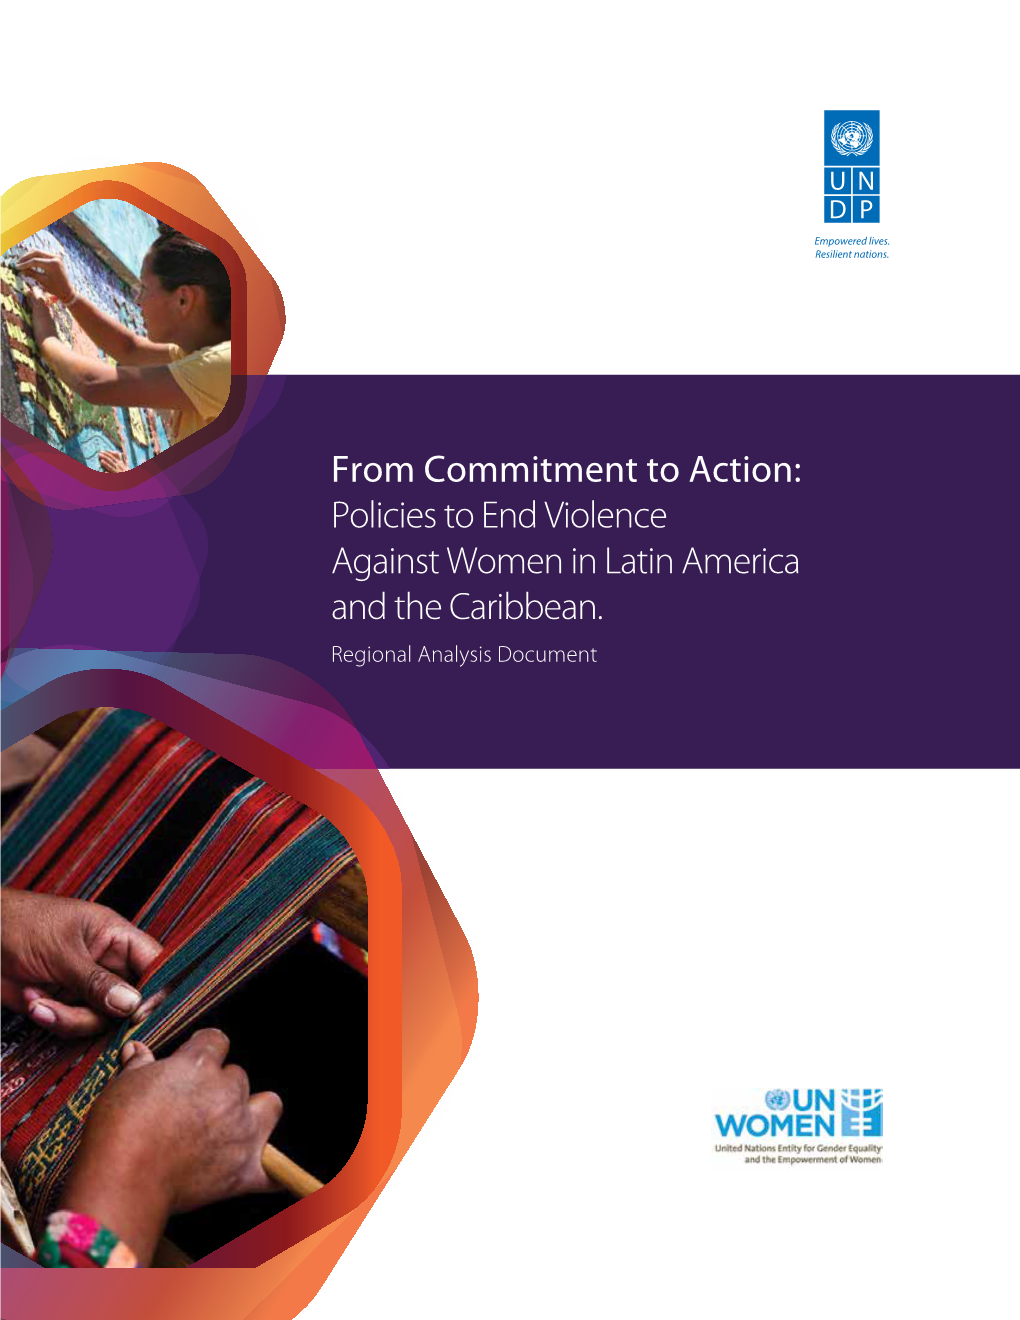 Policies to End Violence Against Women in Latin America and the Caribbean